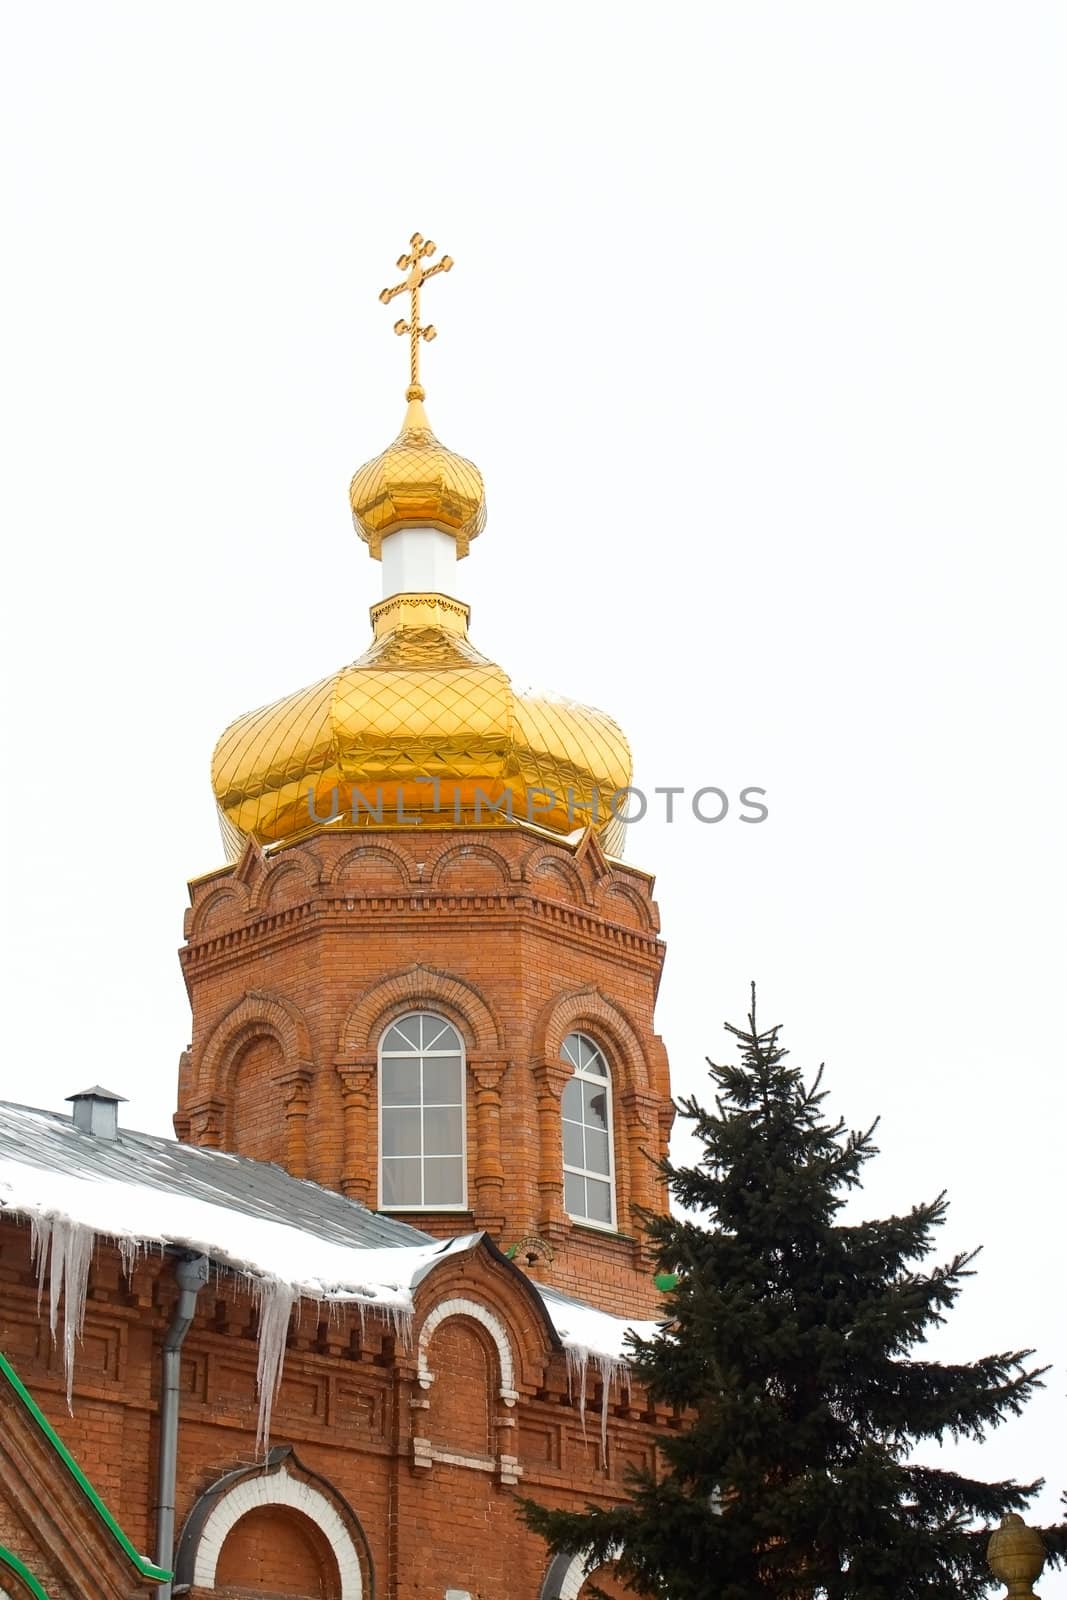 Golden dome of the church and the church building on the skyline.